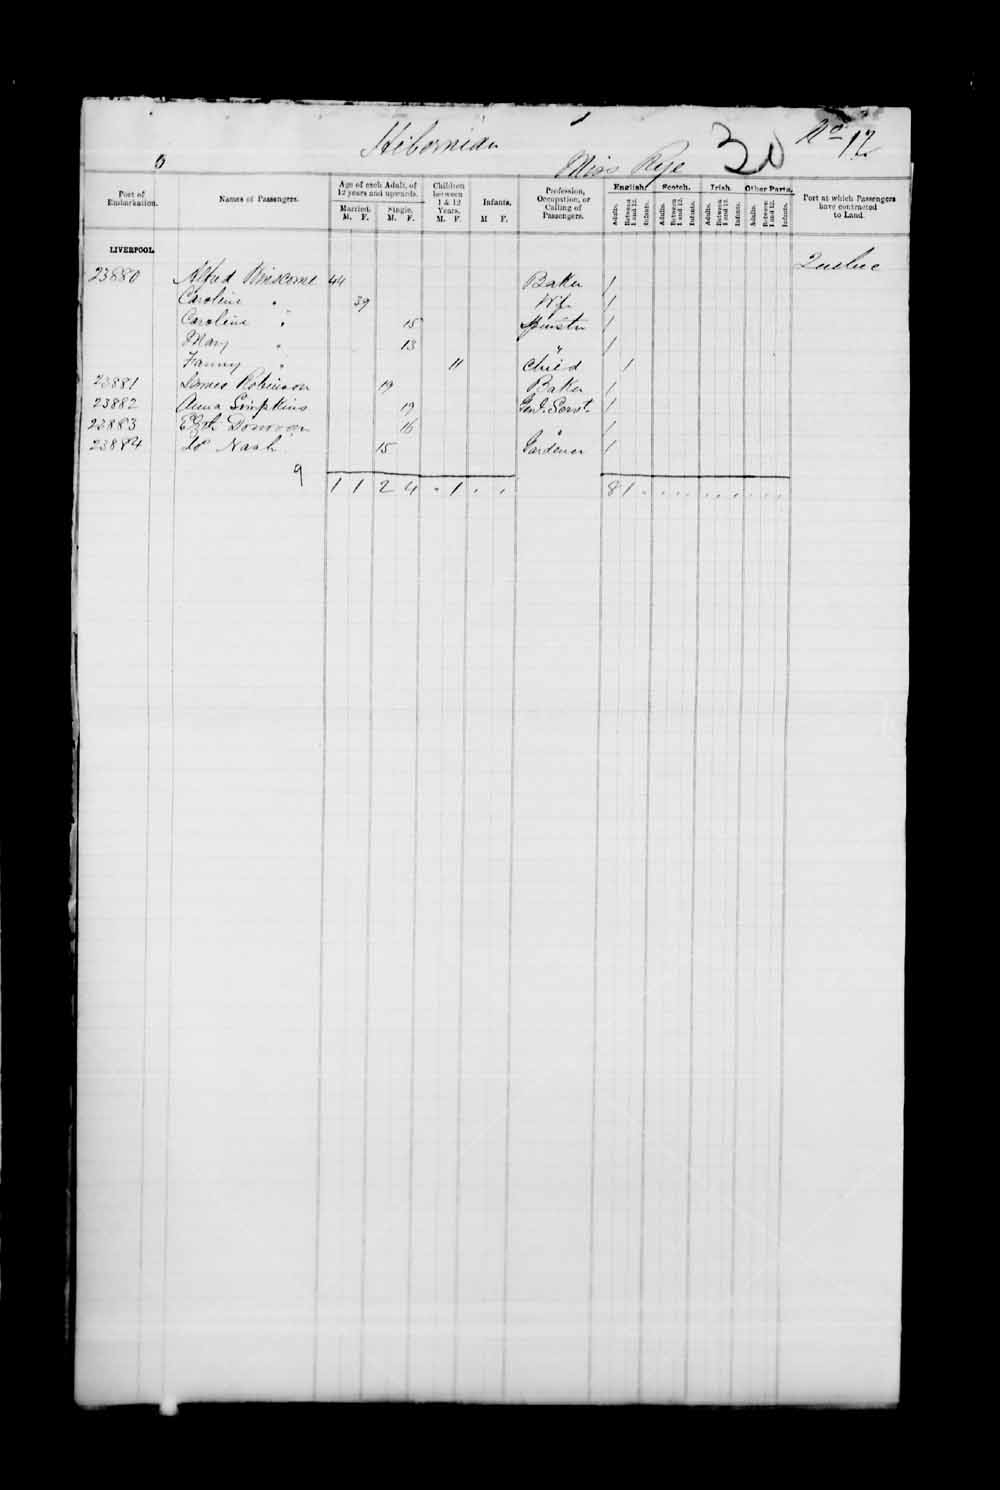 Digitized page of Passenger Lists for Image No.: e003530471